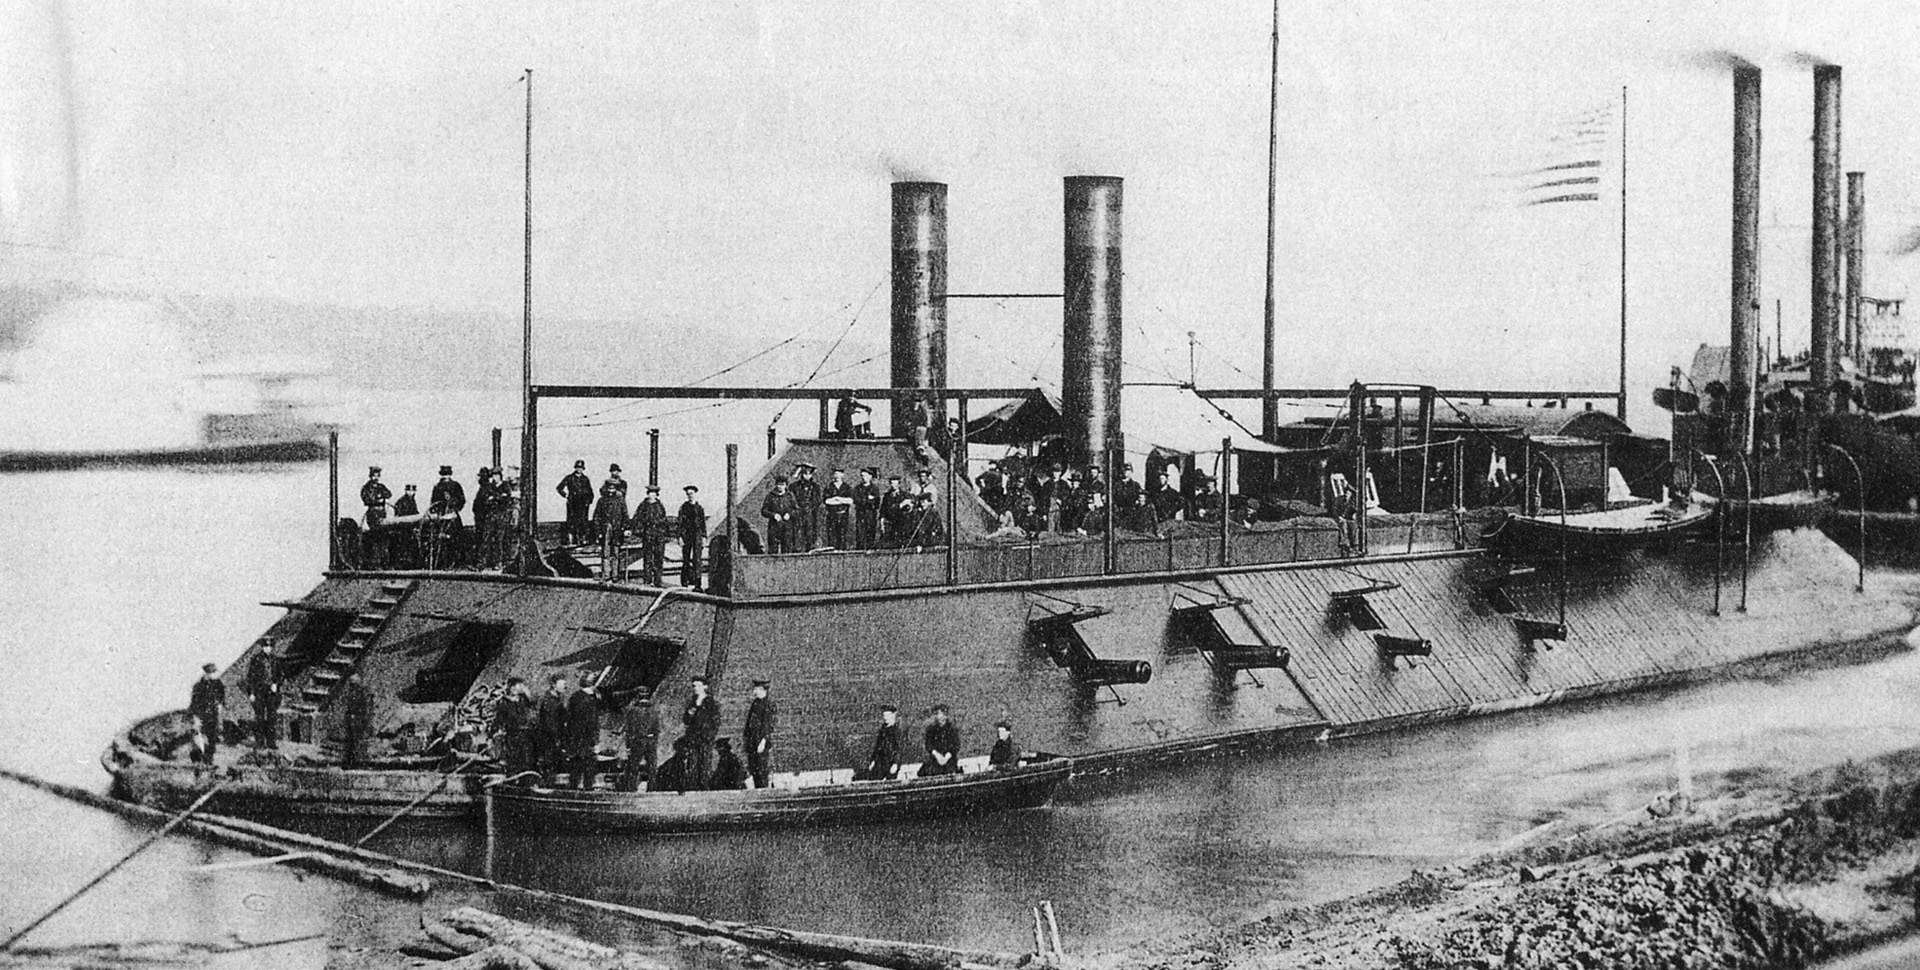 The most famous of James Ead’s seven ironclads, the USS Carondelet sustained more fire than any other vessel in the Western Flotilla.